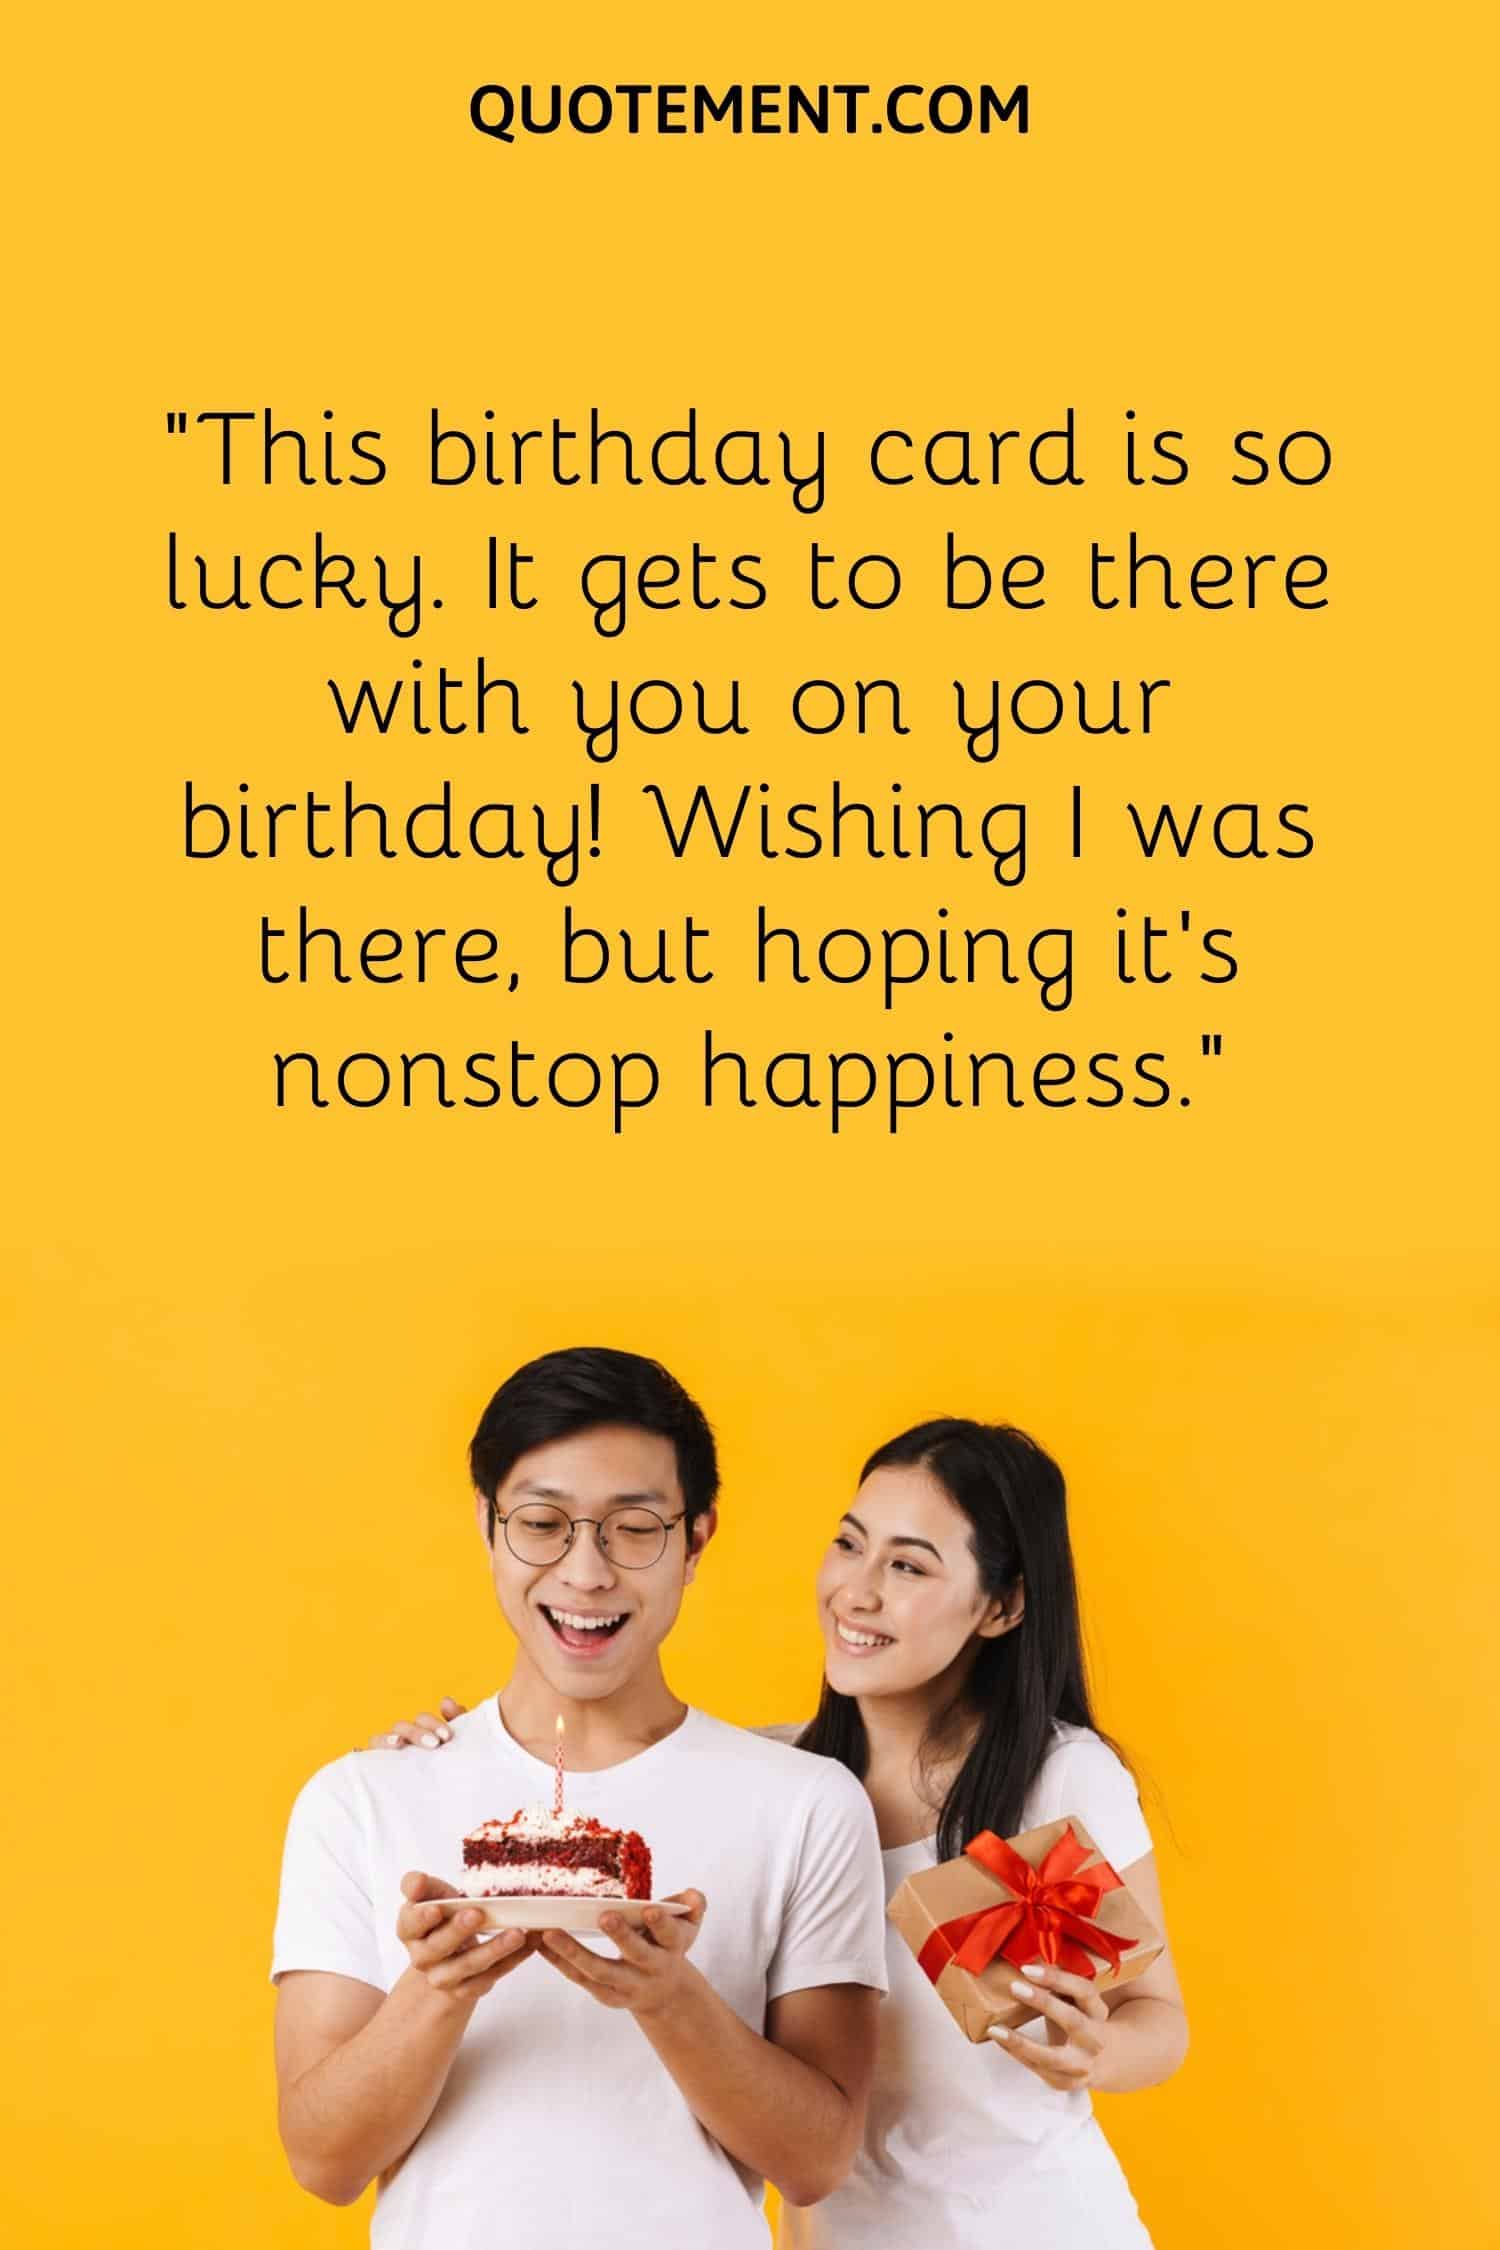 This birthday card is so lucky